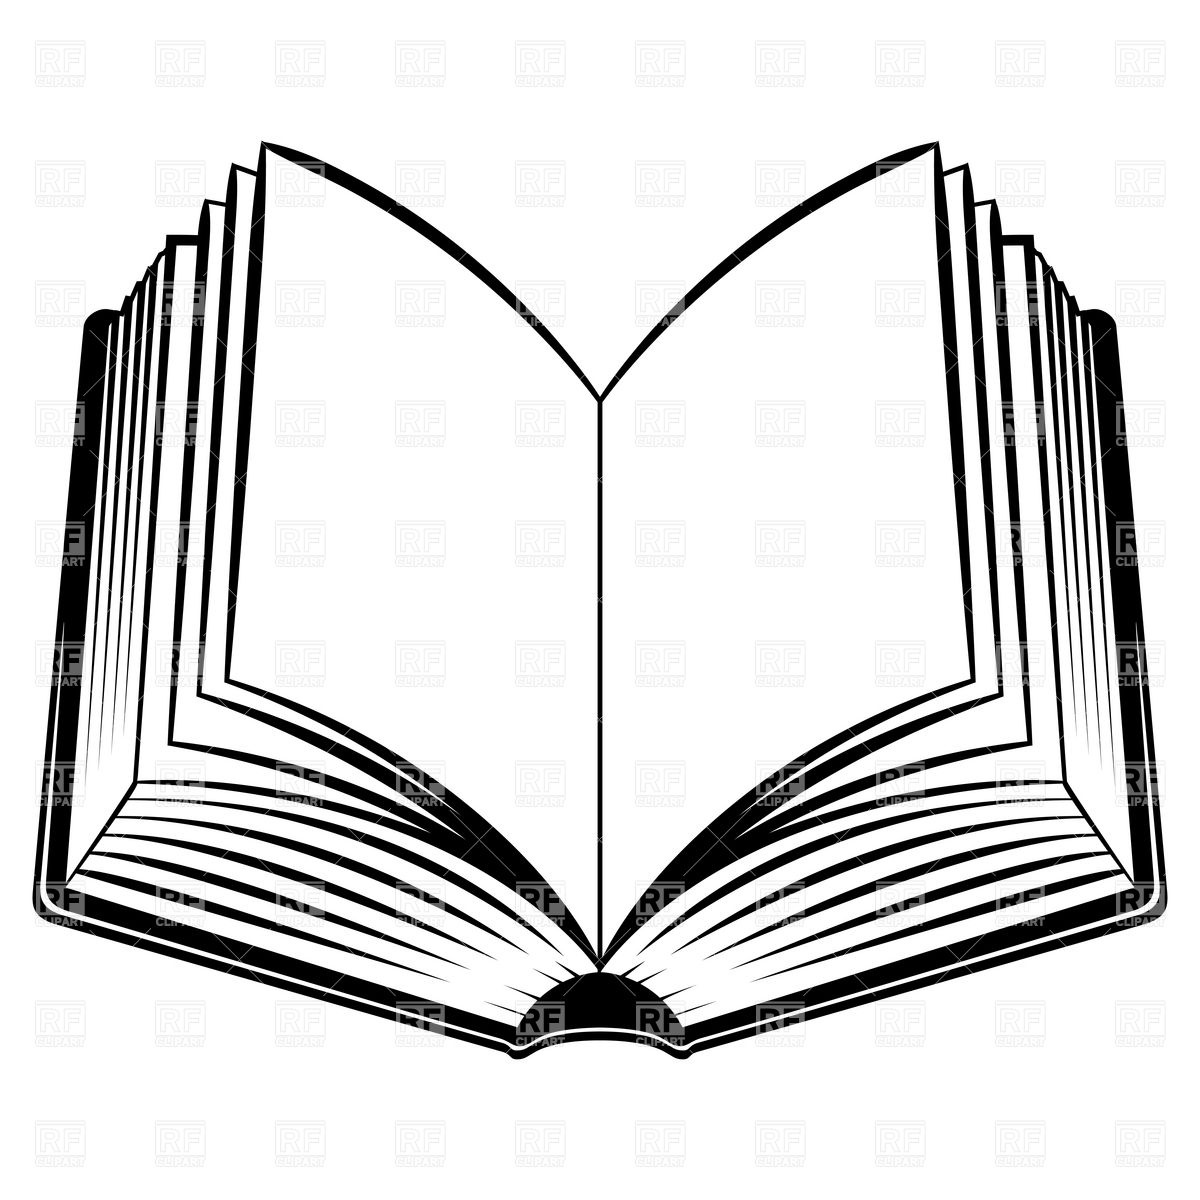 Open book outline clipart free images 2.